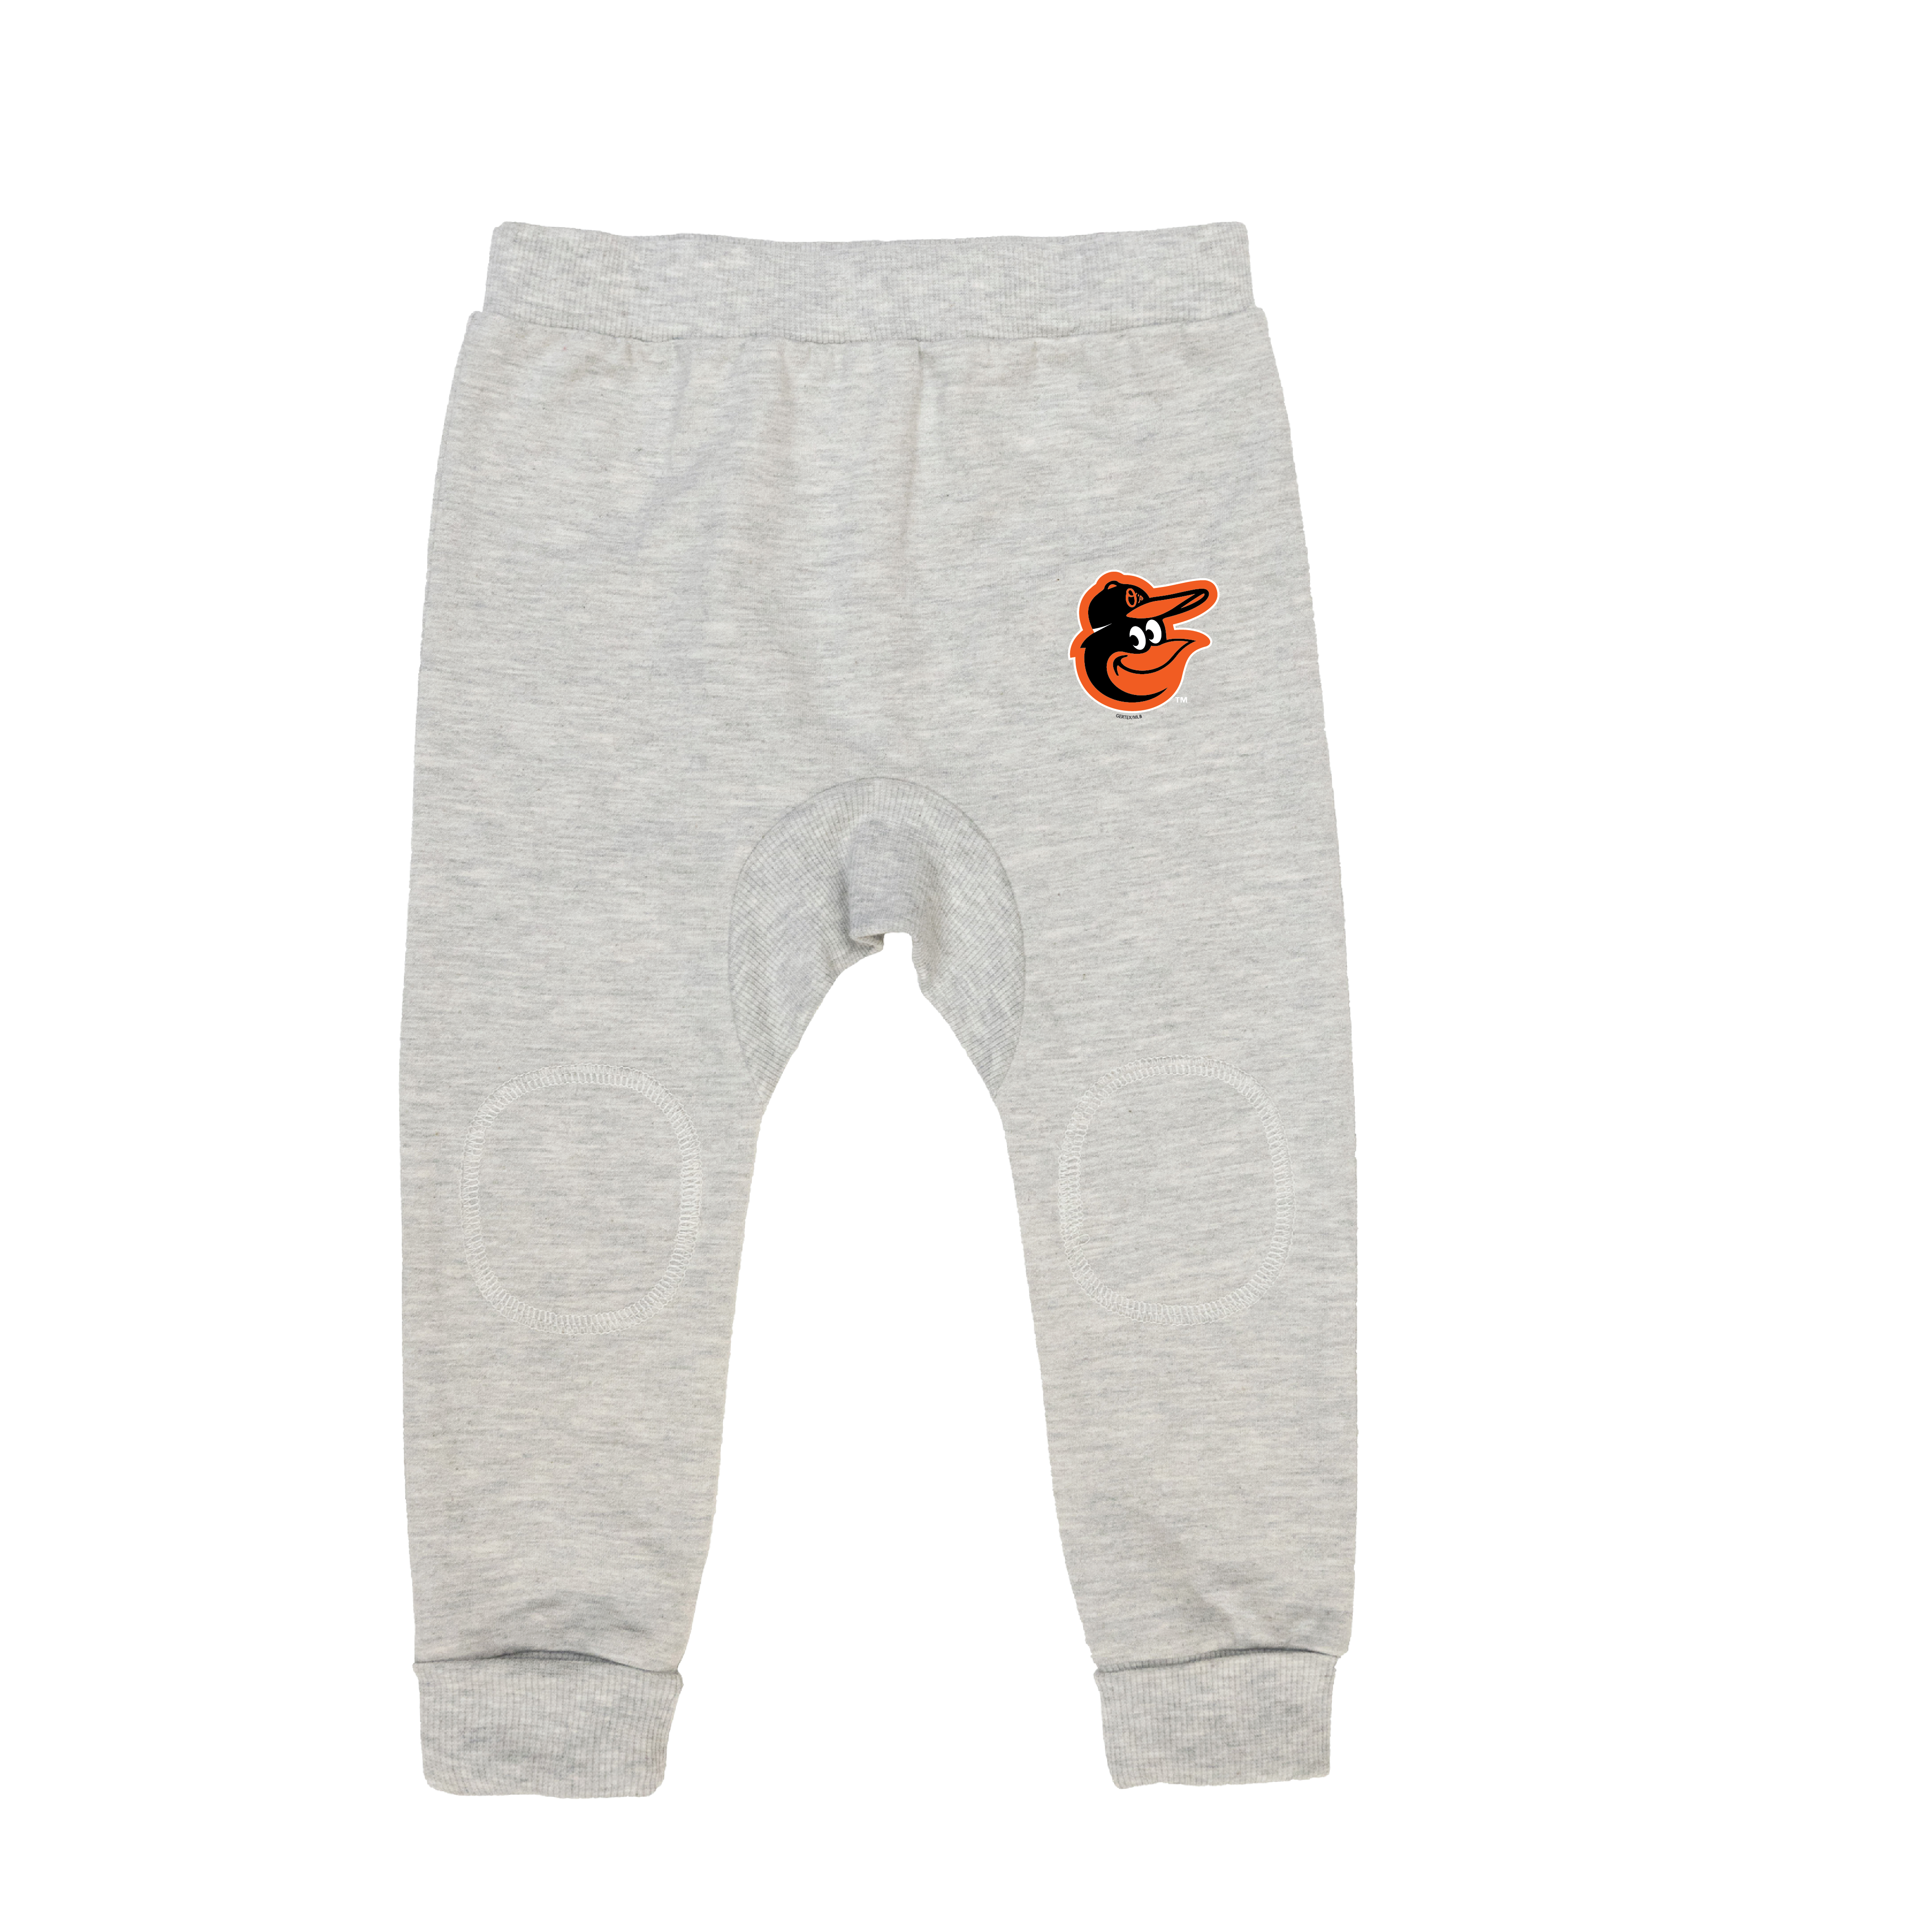 MLB Unisex Baby French Terry Cotton Track Pants